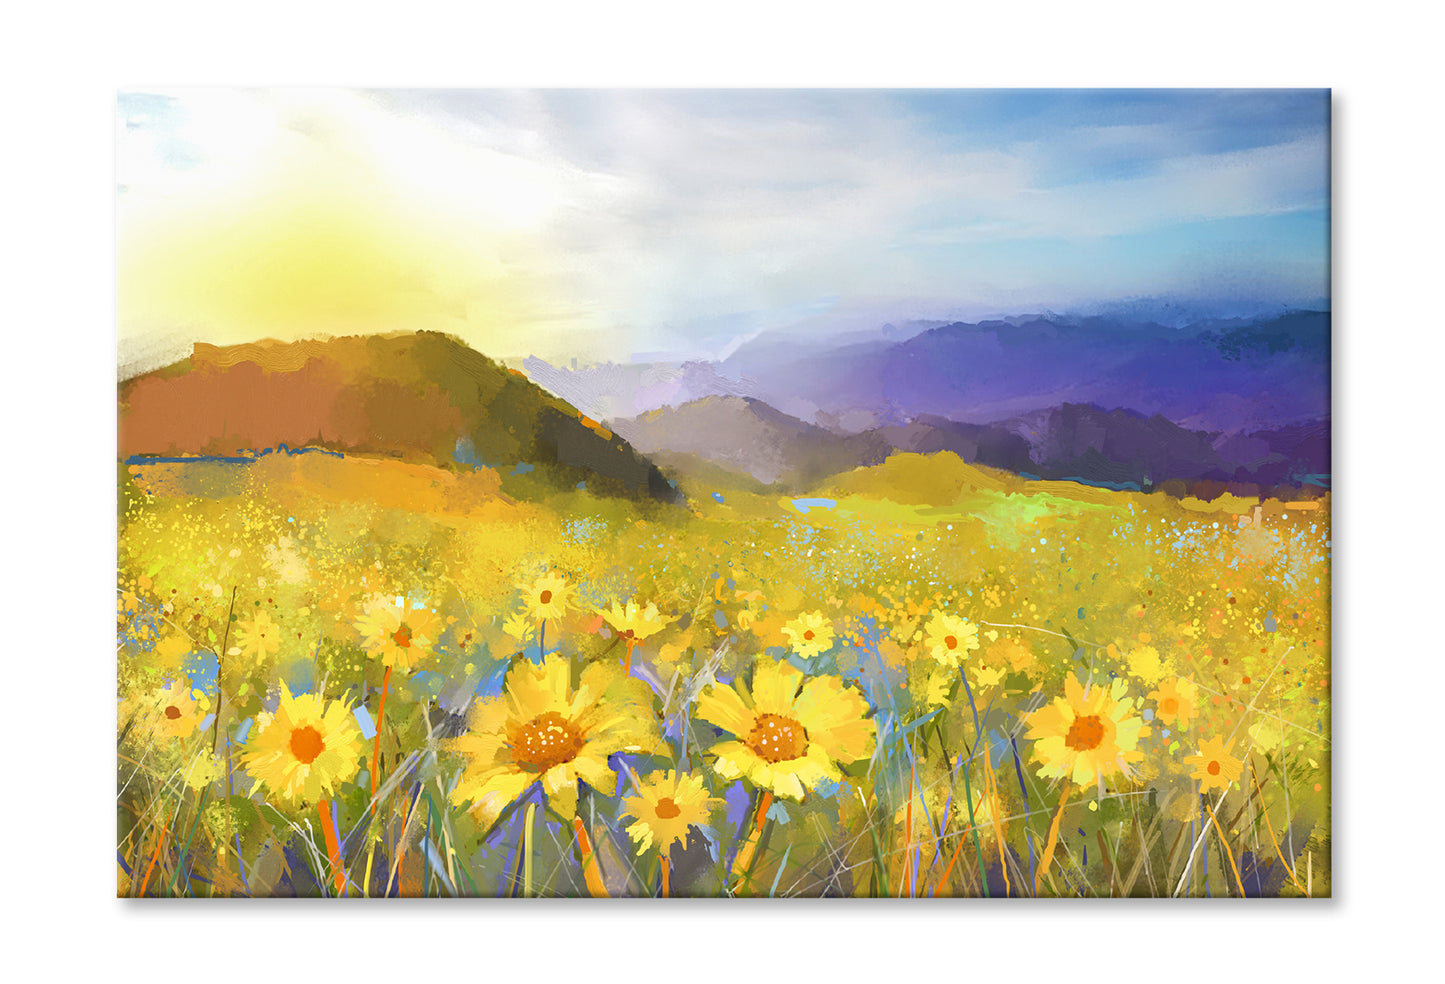 Daisy Flower Blossom, Warm Light Of The Sunset & Hill Oil Painting Limited Edition High Quality Print Stretched Canvas None